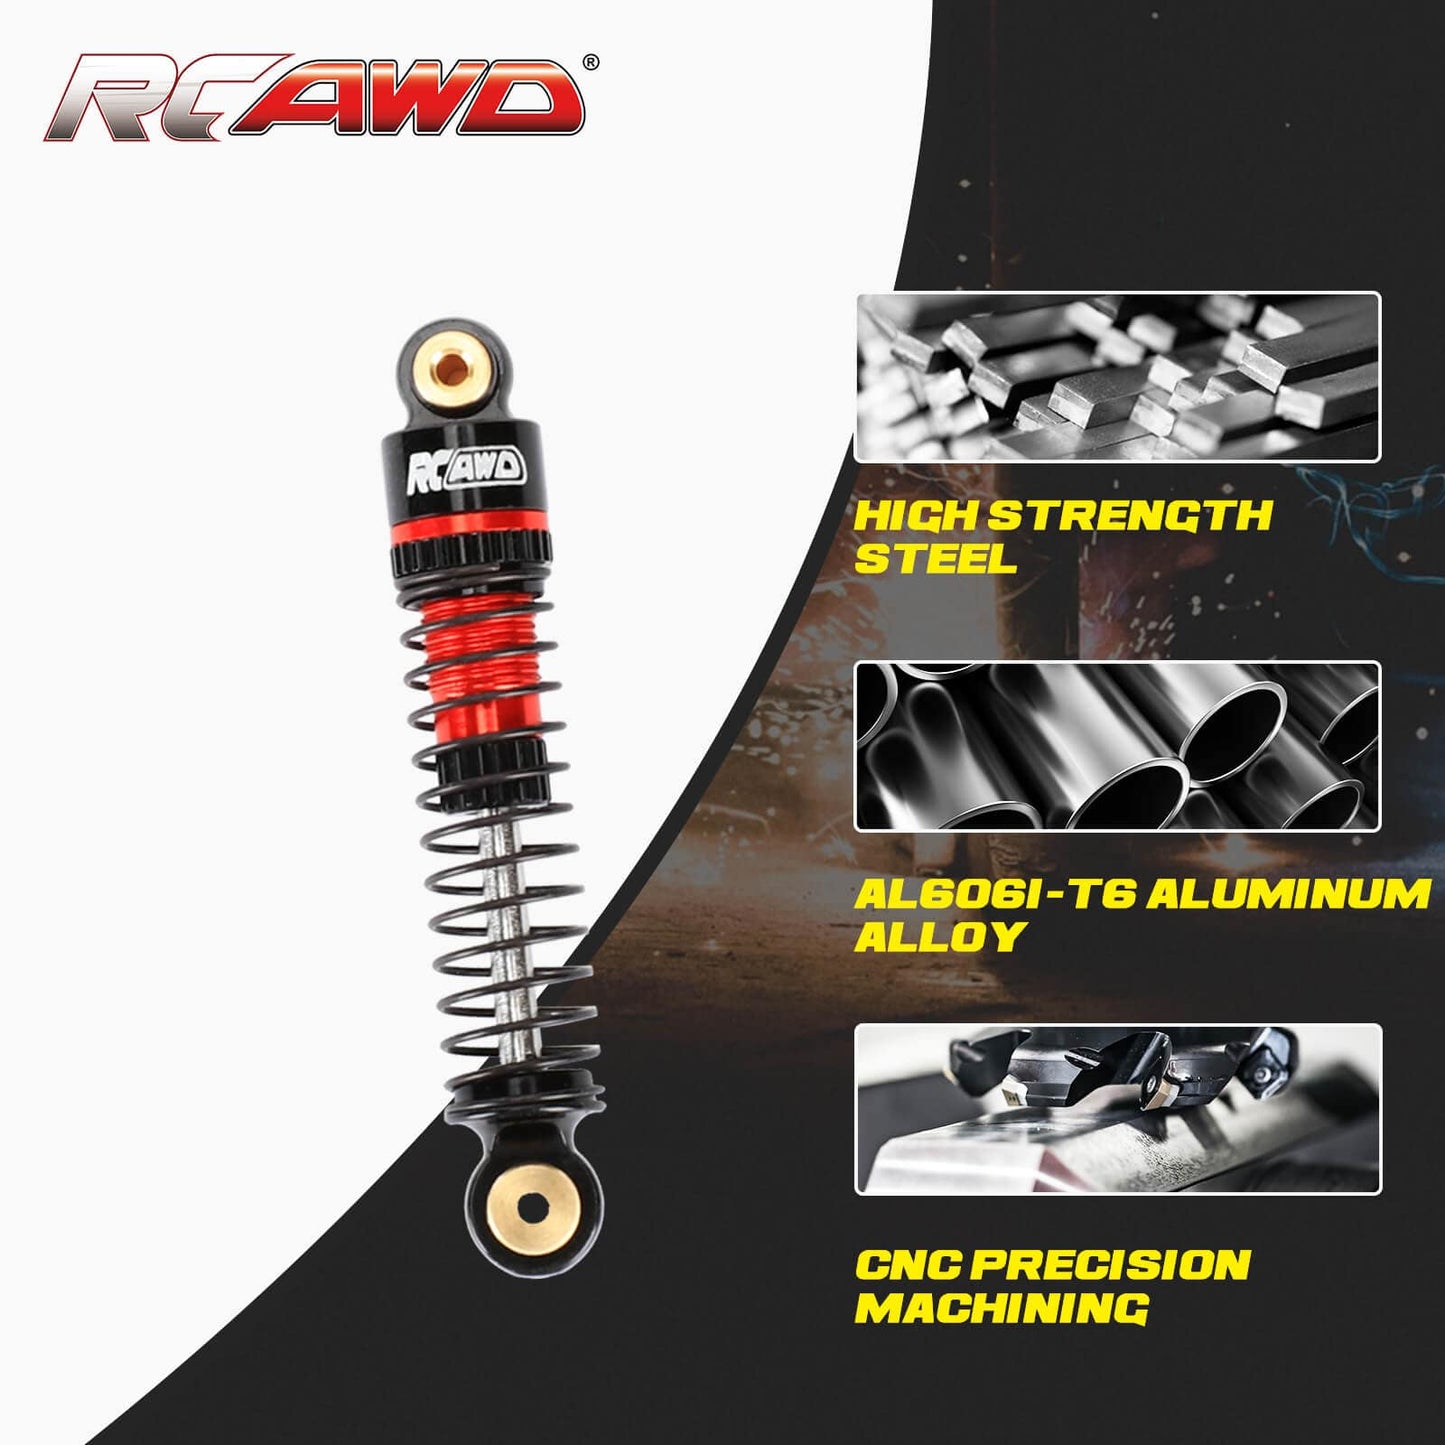 RCAWD Axial SCX24 Upgrades Aluminum Damper Holder Absorber Mount & Shocks Complete Set for 1/24 RC Crawler - RCAWD